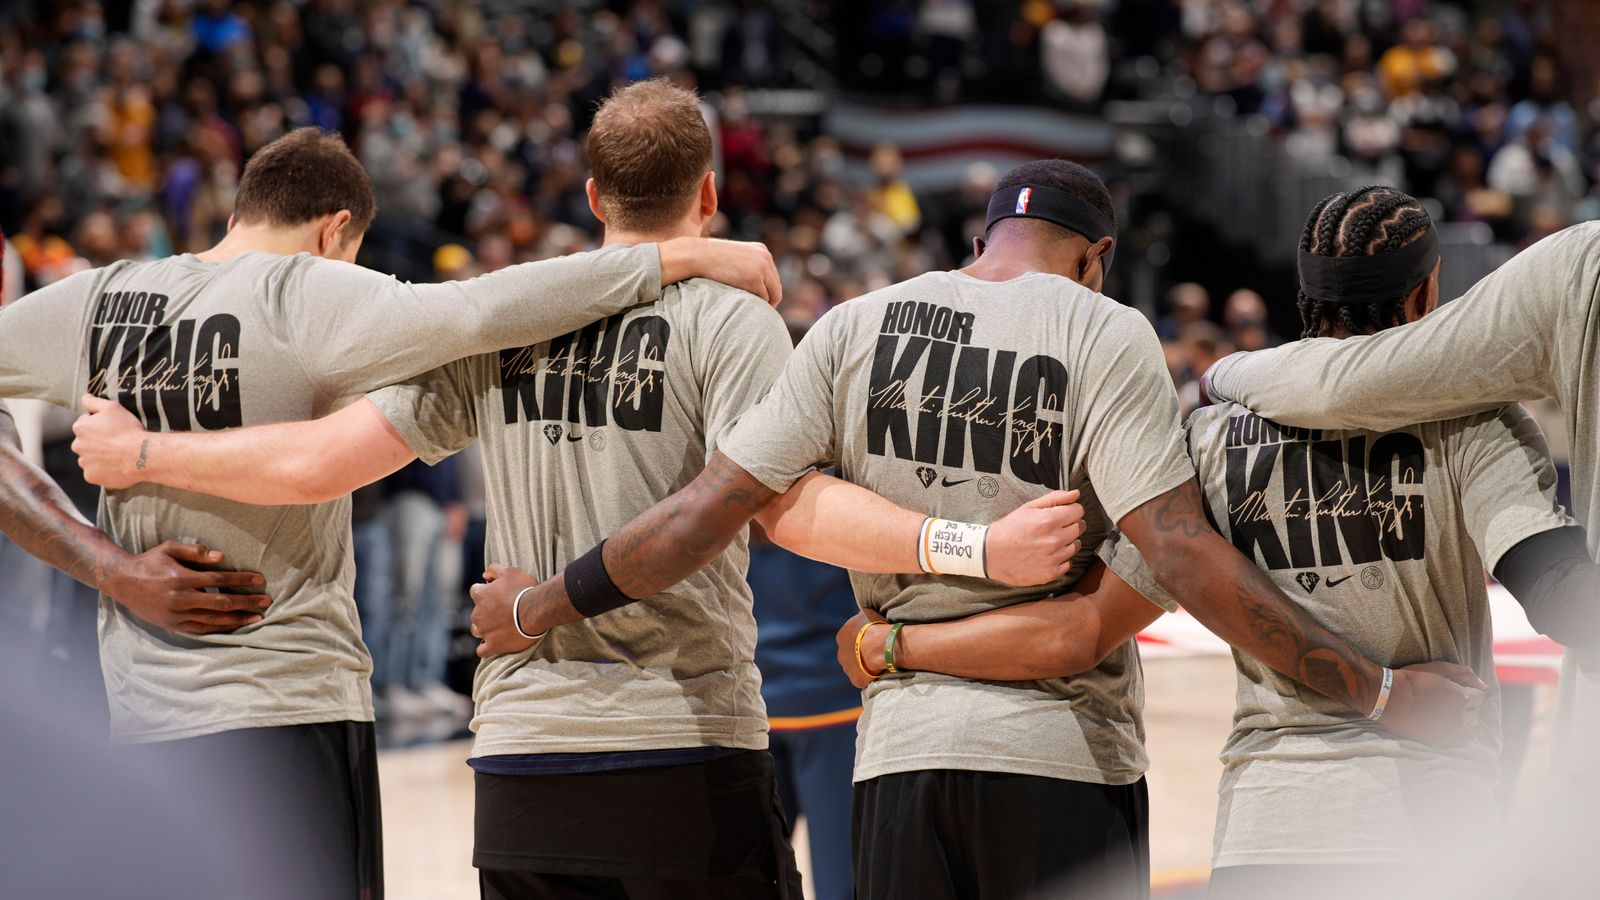 NBA teams honor Martin Luther King Jr.'s legacy on holiday